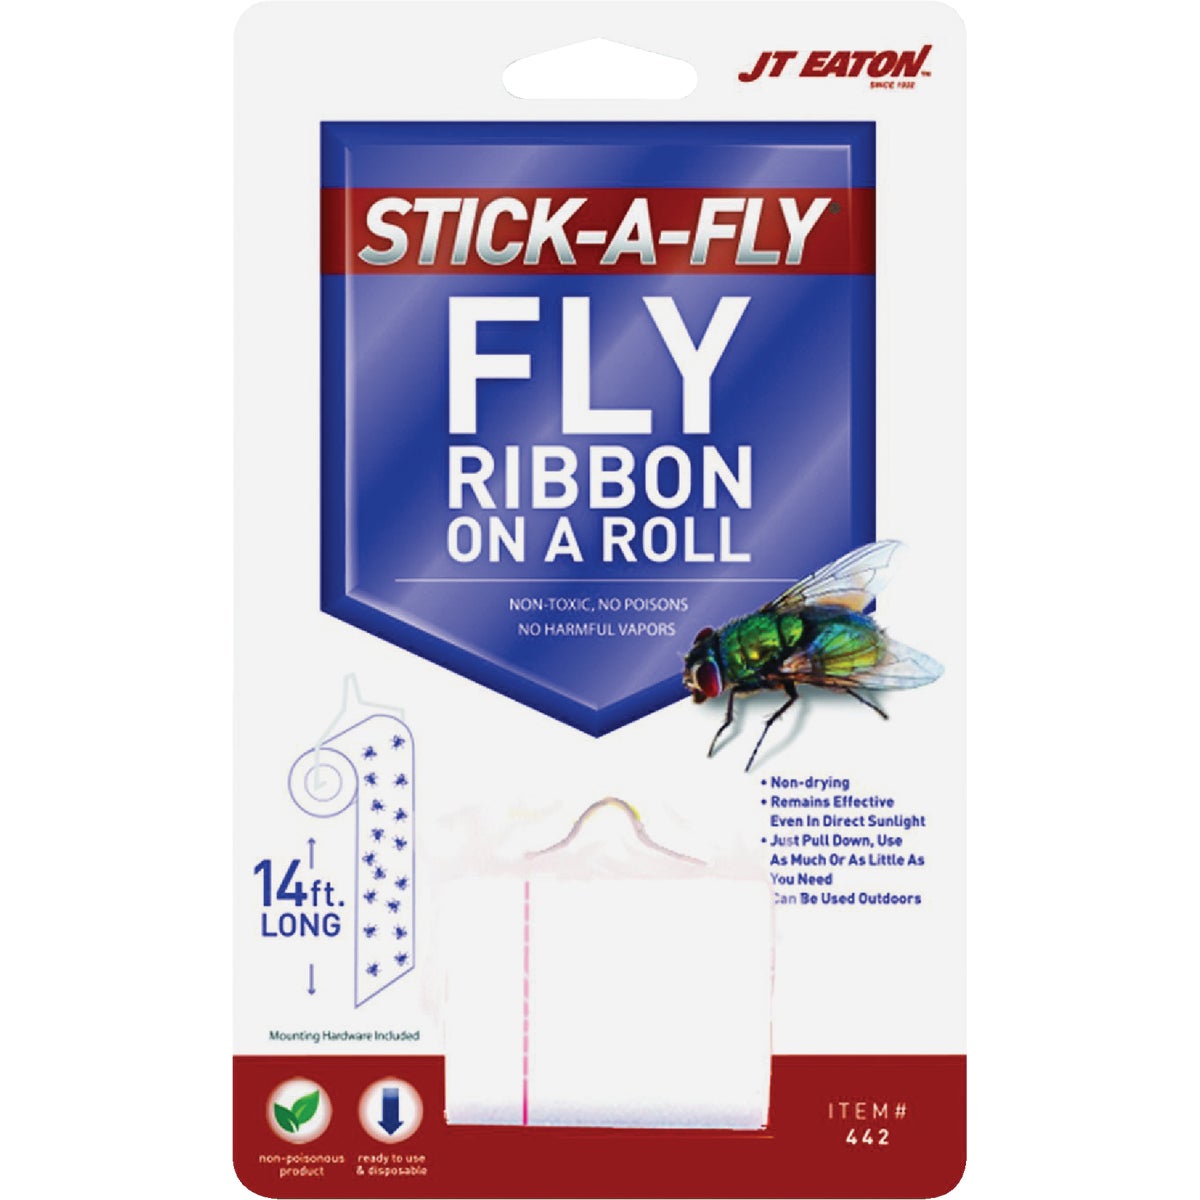 Item 745215, Fly paper on a spool that can be hung anywhere flies gather.